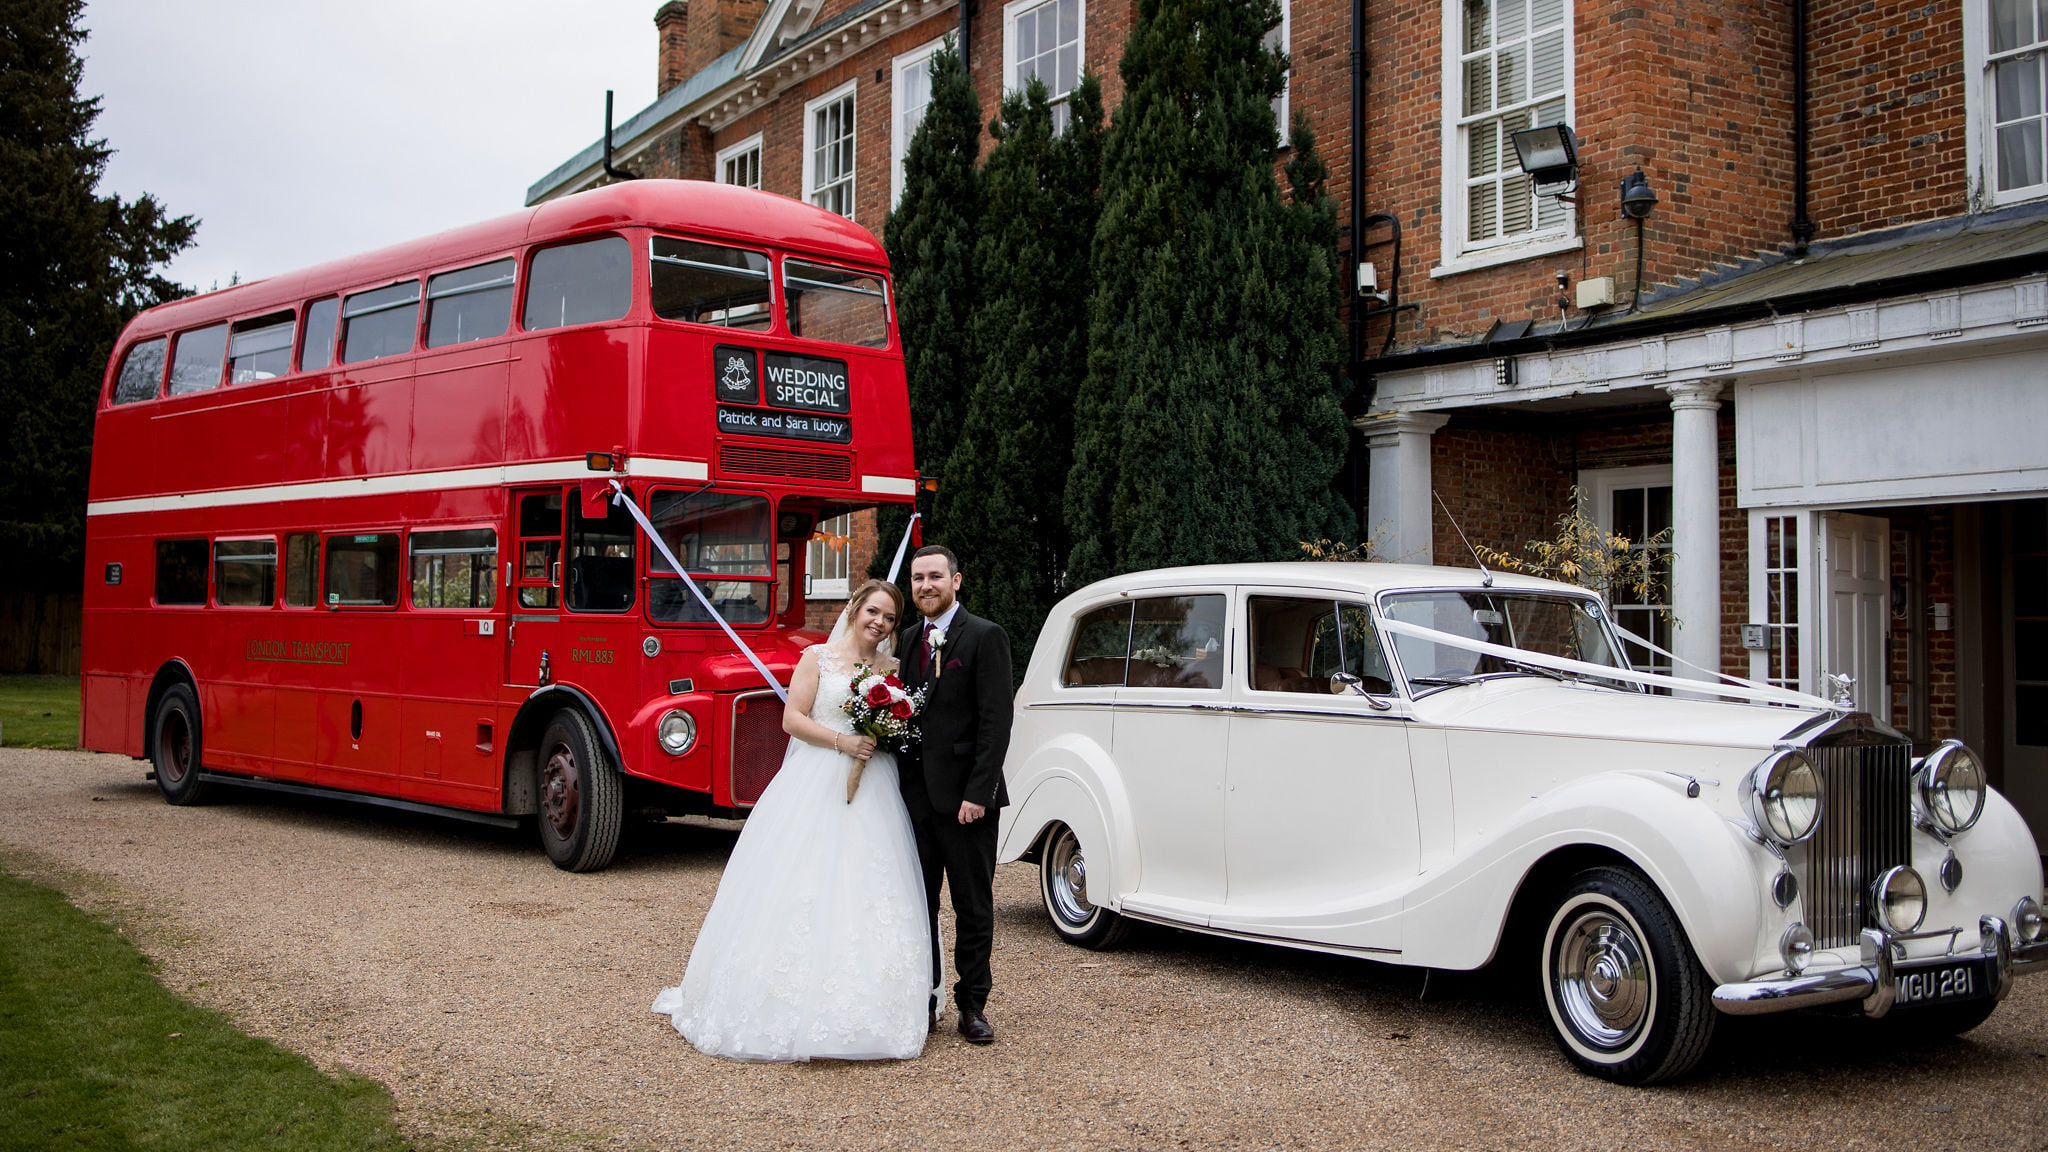 Classic Rolls-Royce followed by a large double decker red bus in front of a wedding venue in Woking